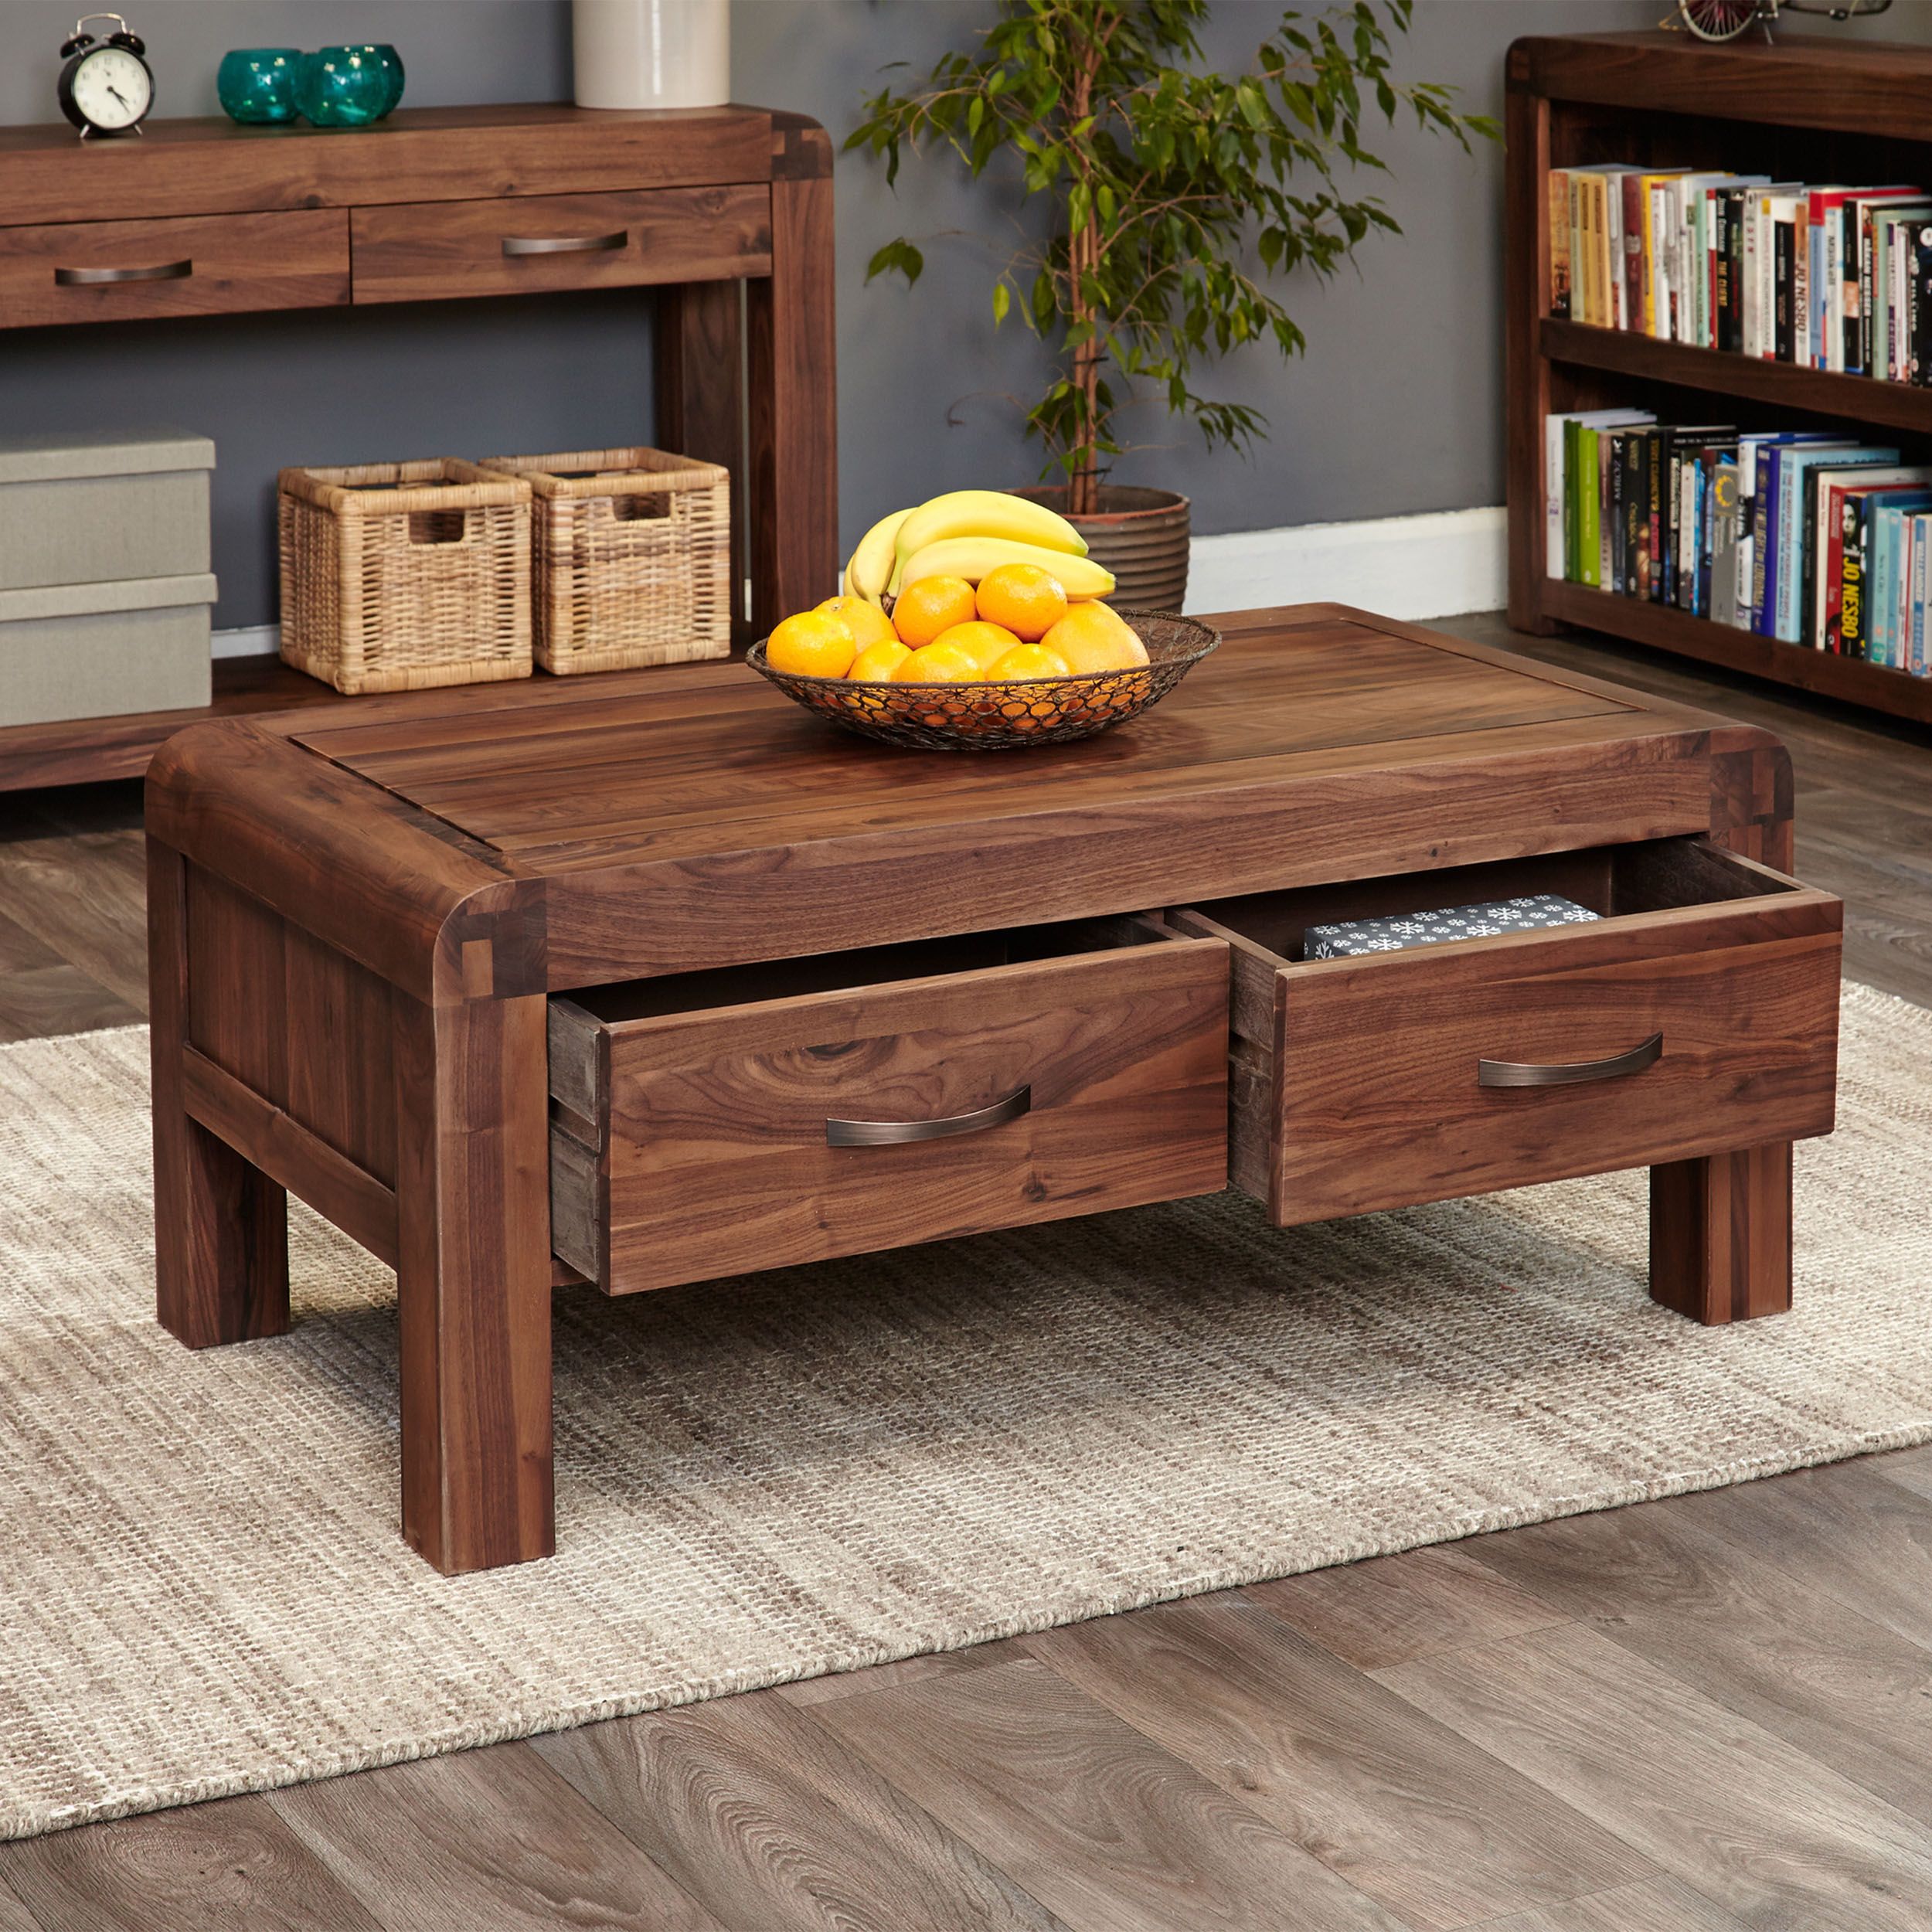 Solid Walnut Coffee Table With Storage – Shiro Regarding Pemberly Row Replicated Wood Coffee Tables (Gallery 15 of 20)